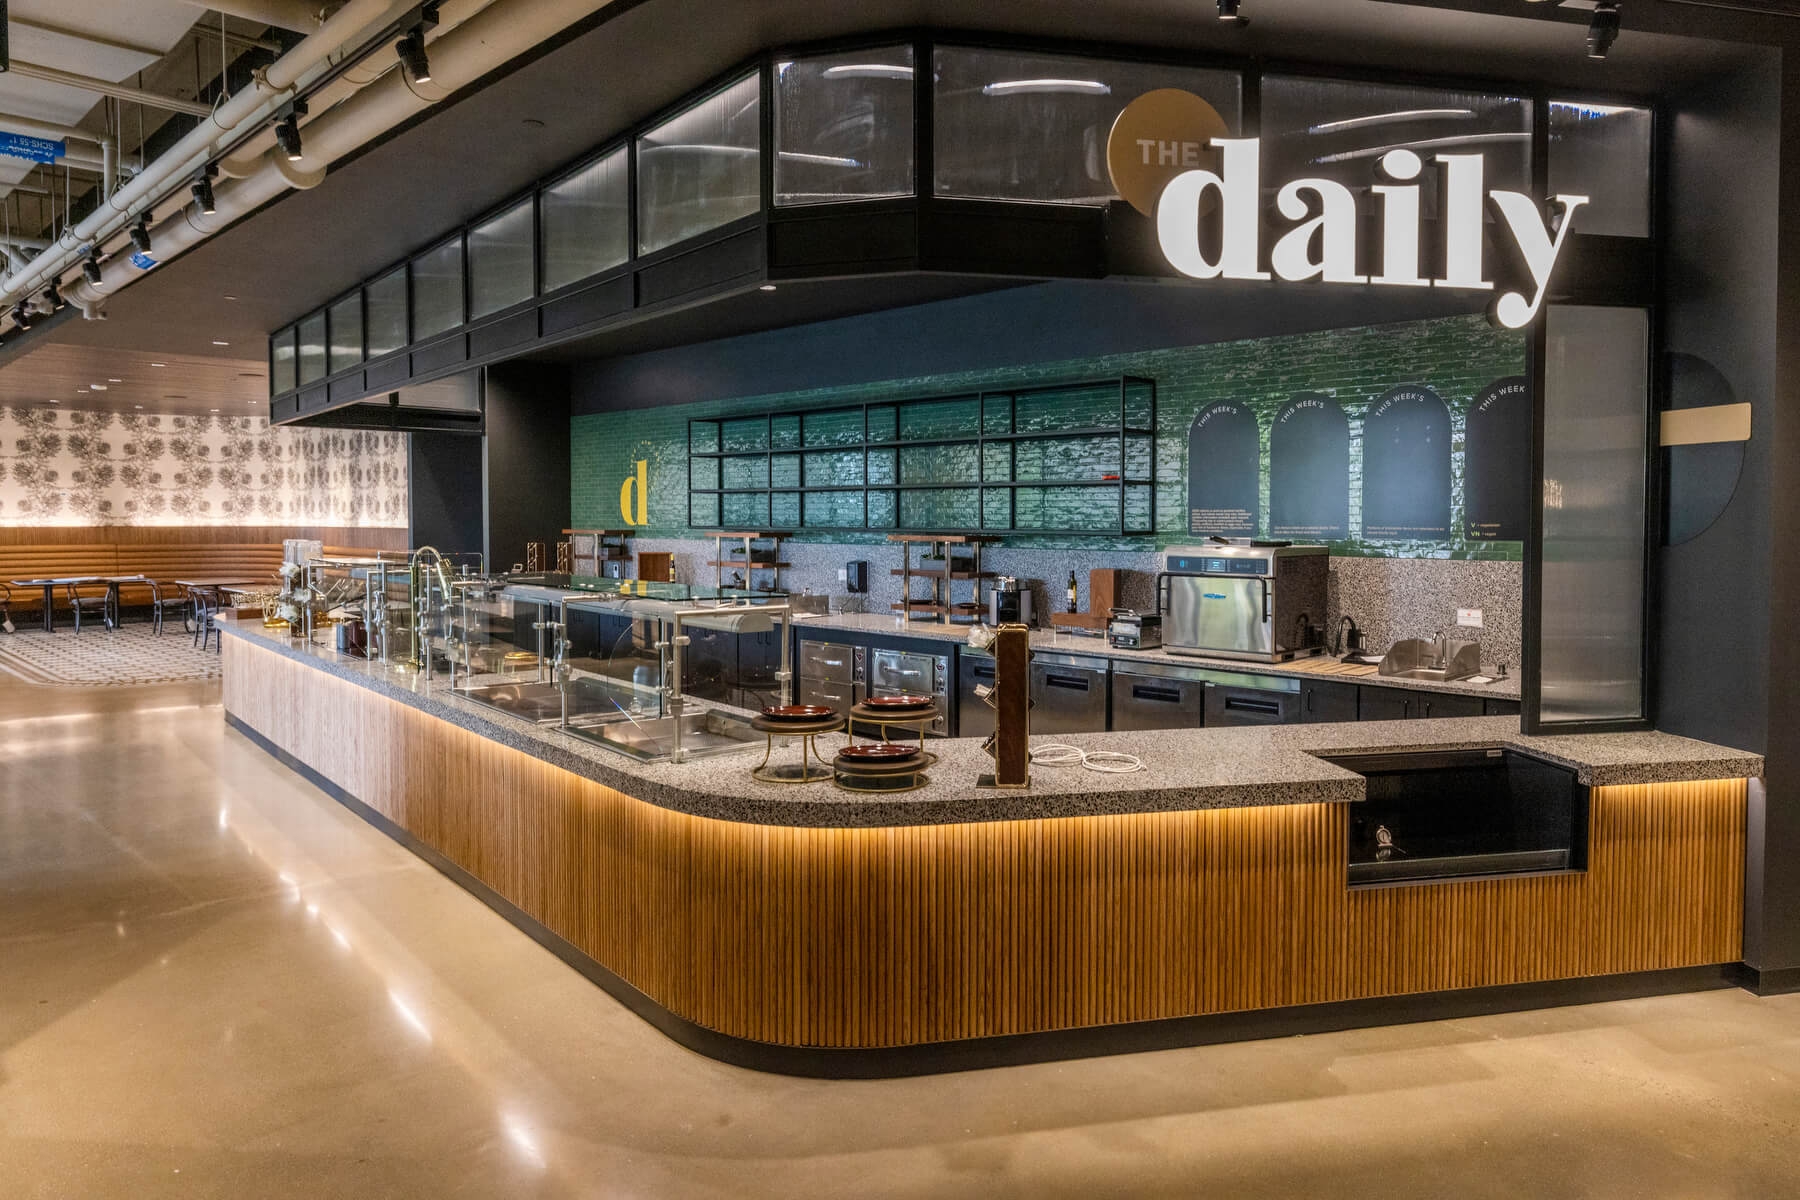 An image of the Daily Cafe at Amazon's second headquarters